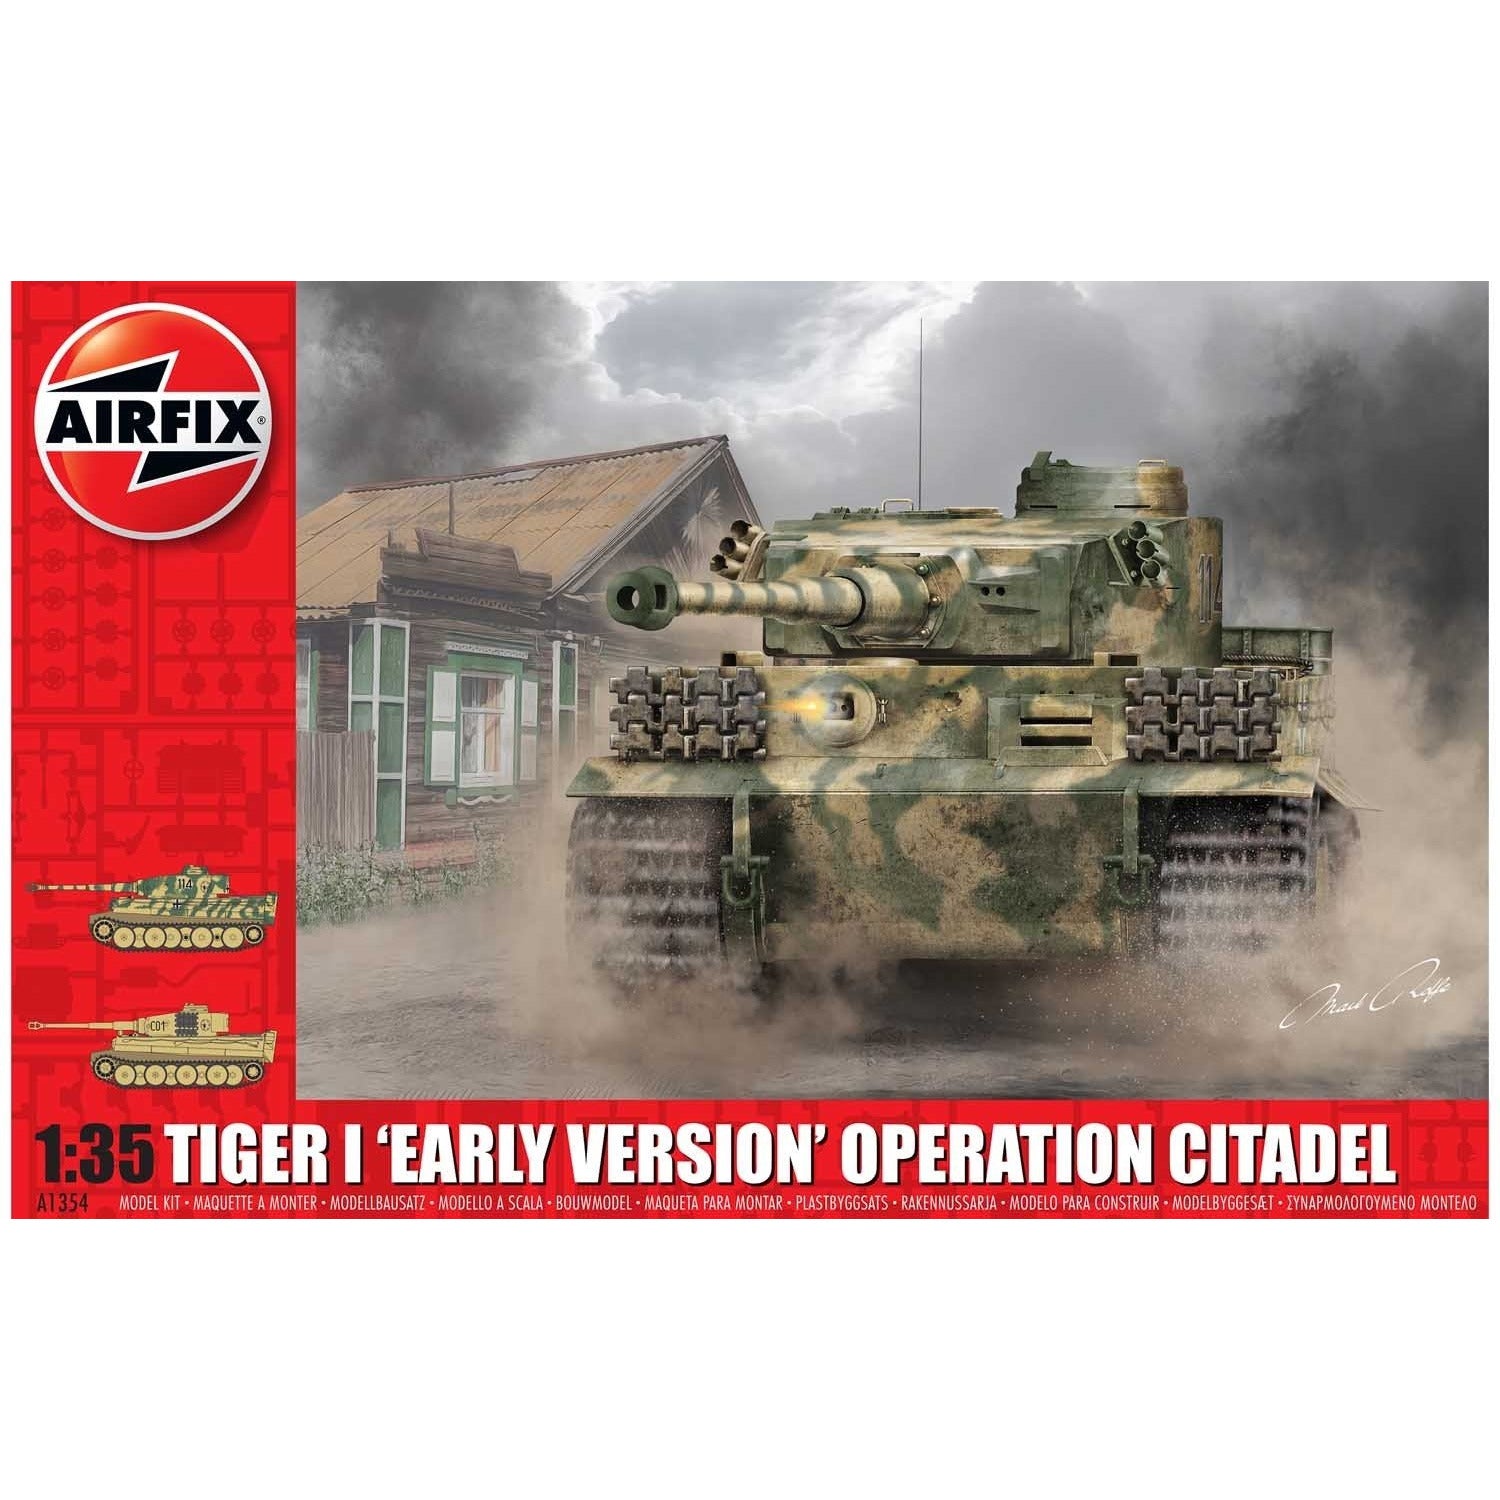 Tiger I Early Version Operation Citadel 1/35 #01354 by Airfix